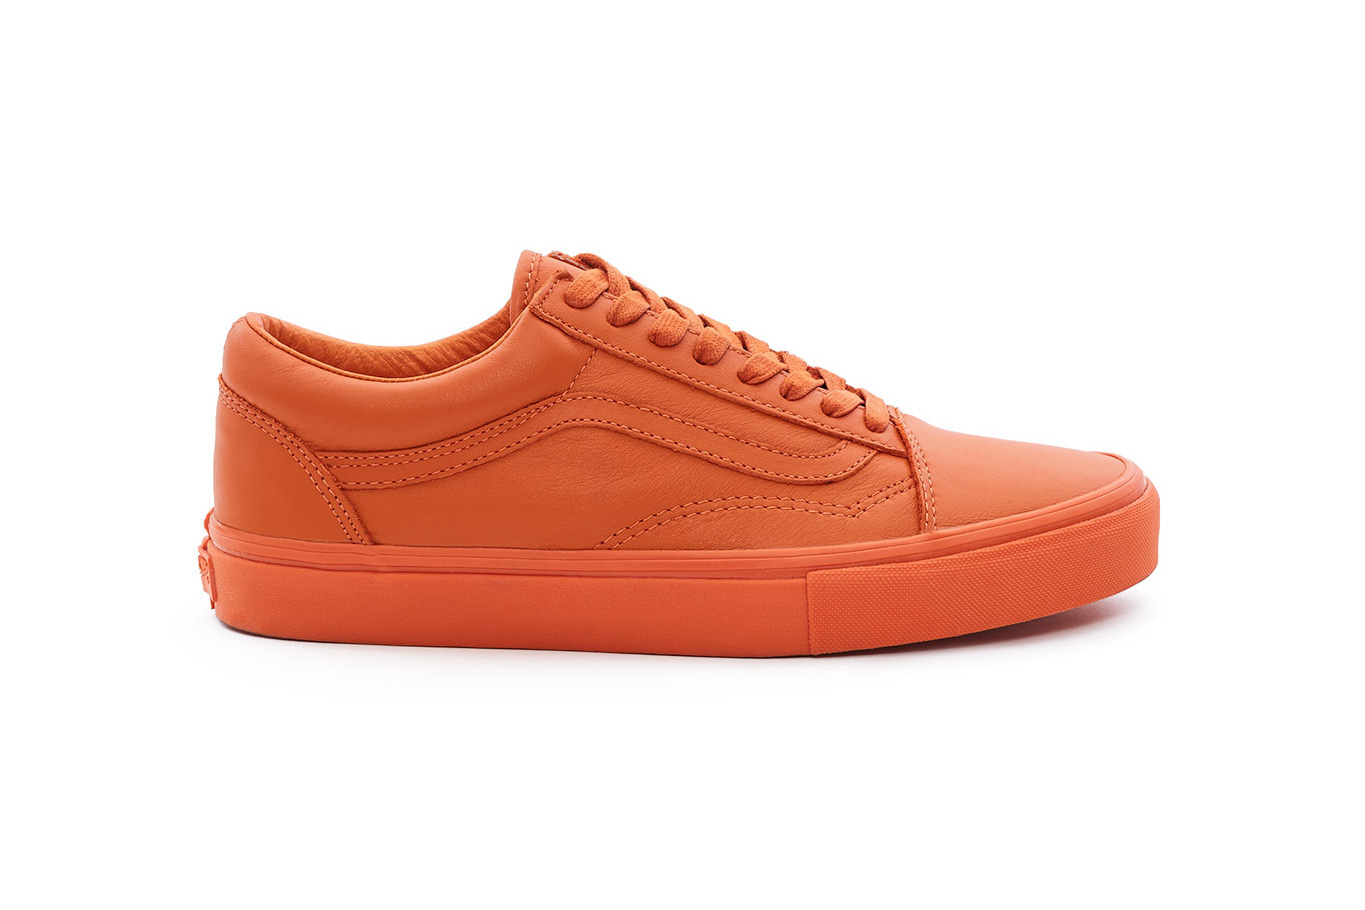 opening-ceremony-vans-leather-mono-pack-5